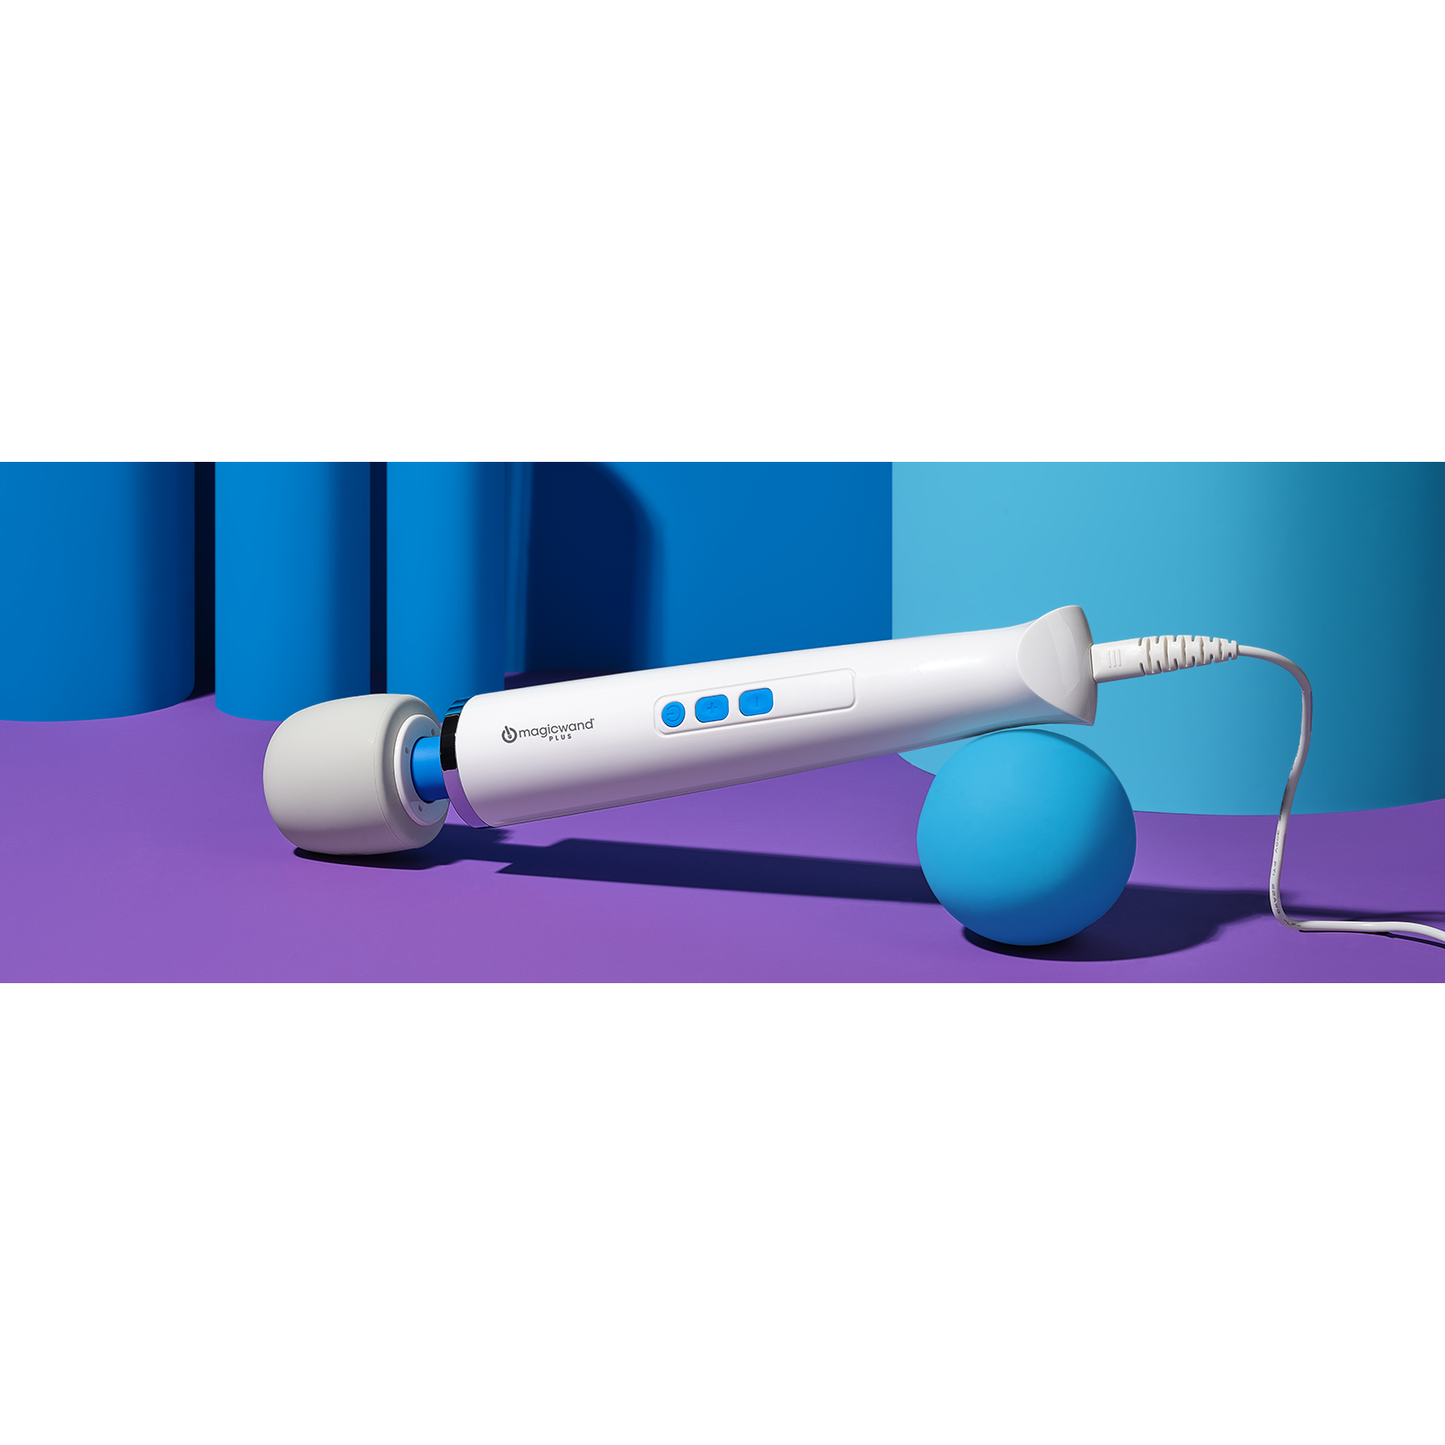 Magic Wand Plus Massager - Thorn & Feather